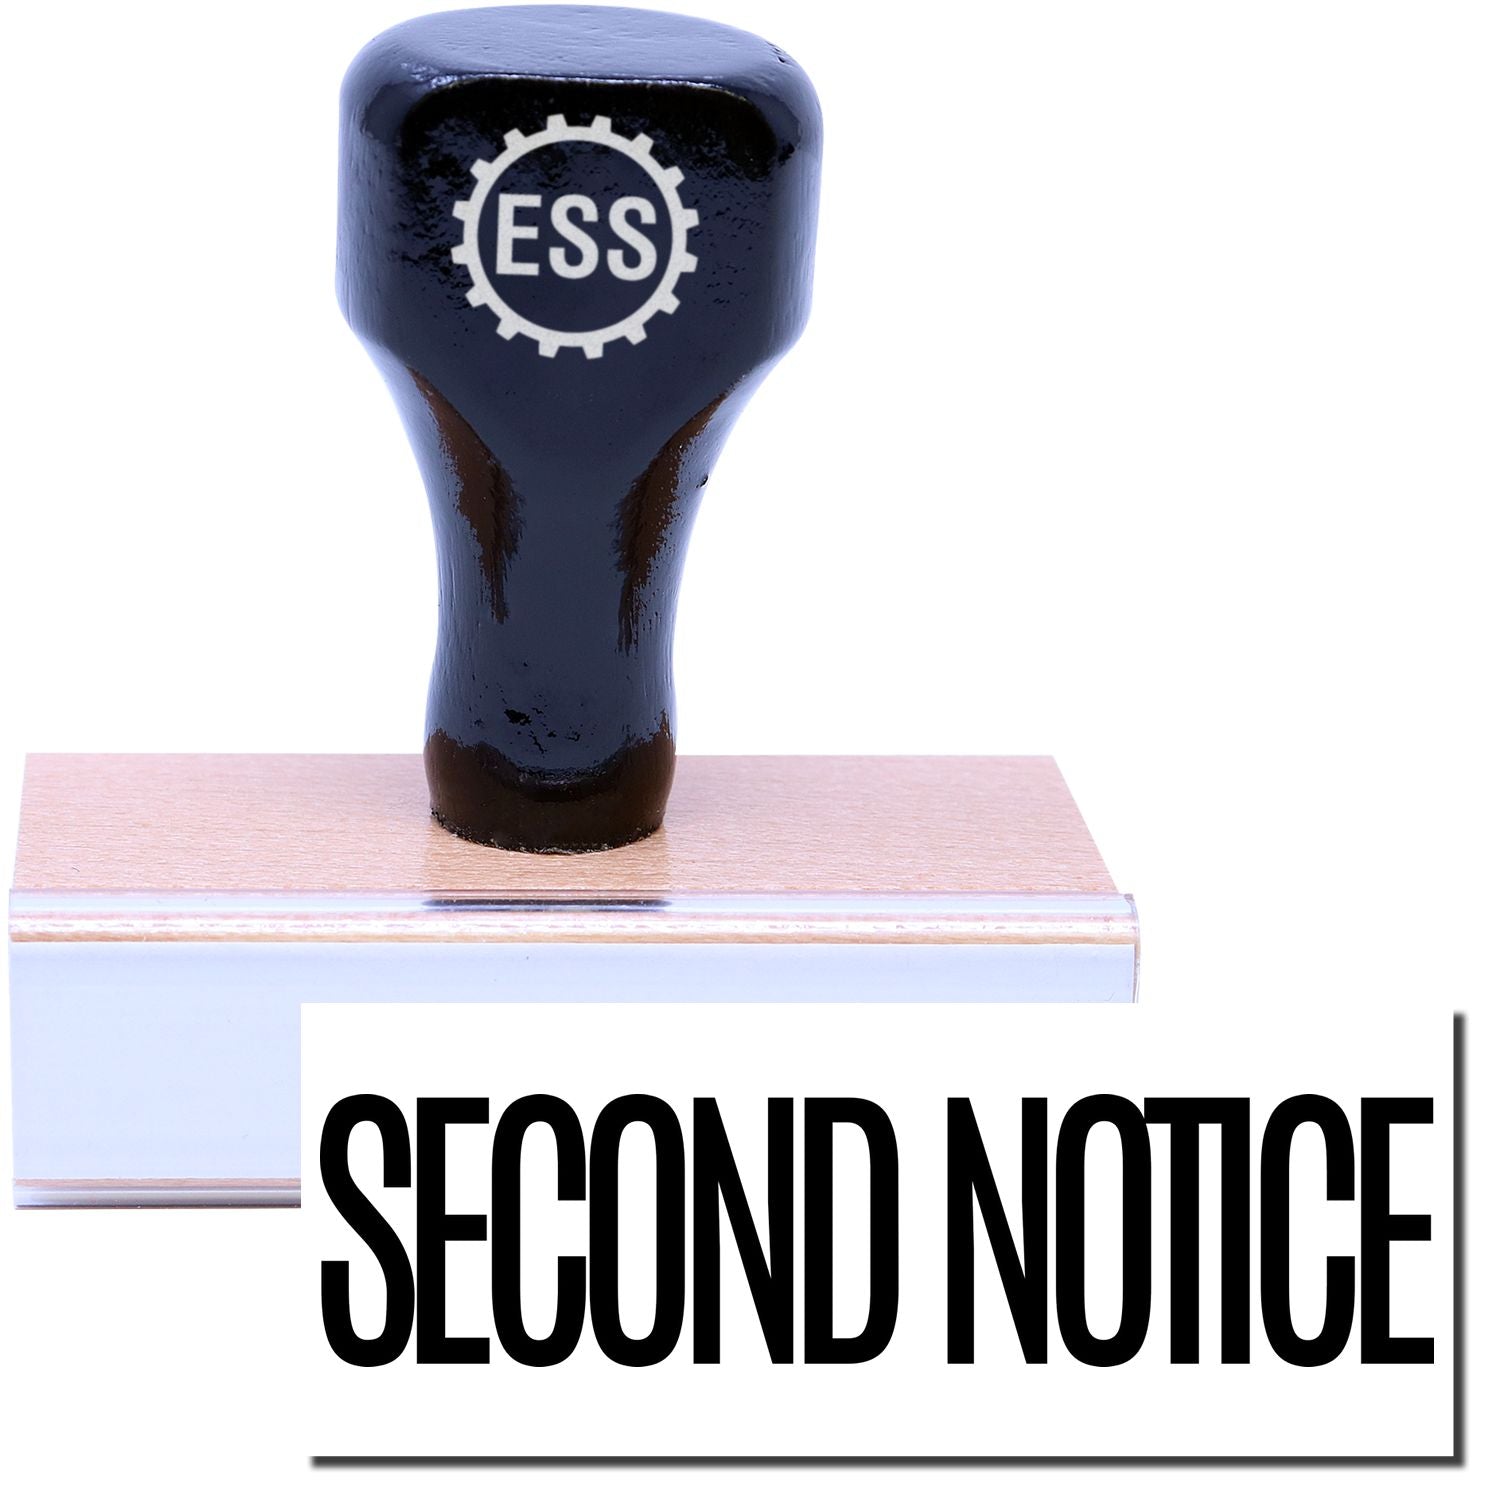 A stock office rubber stamp with a stamped image showing how the text "SECOND NOTICE" in a narrow font is displayed after stamping.